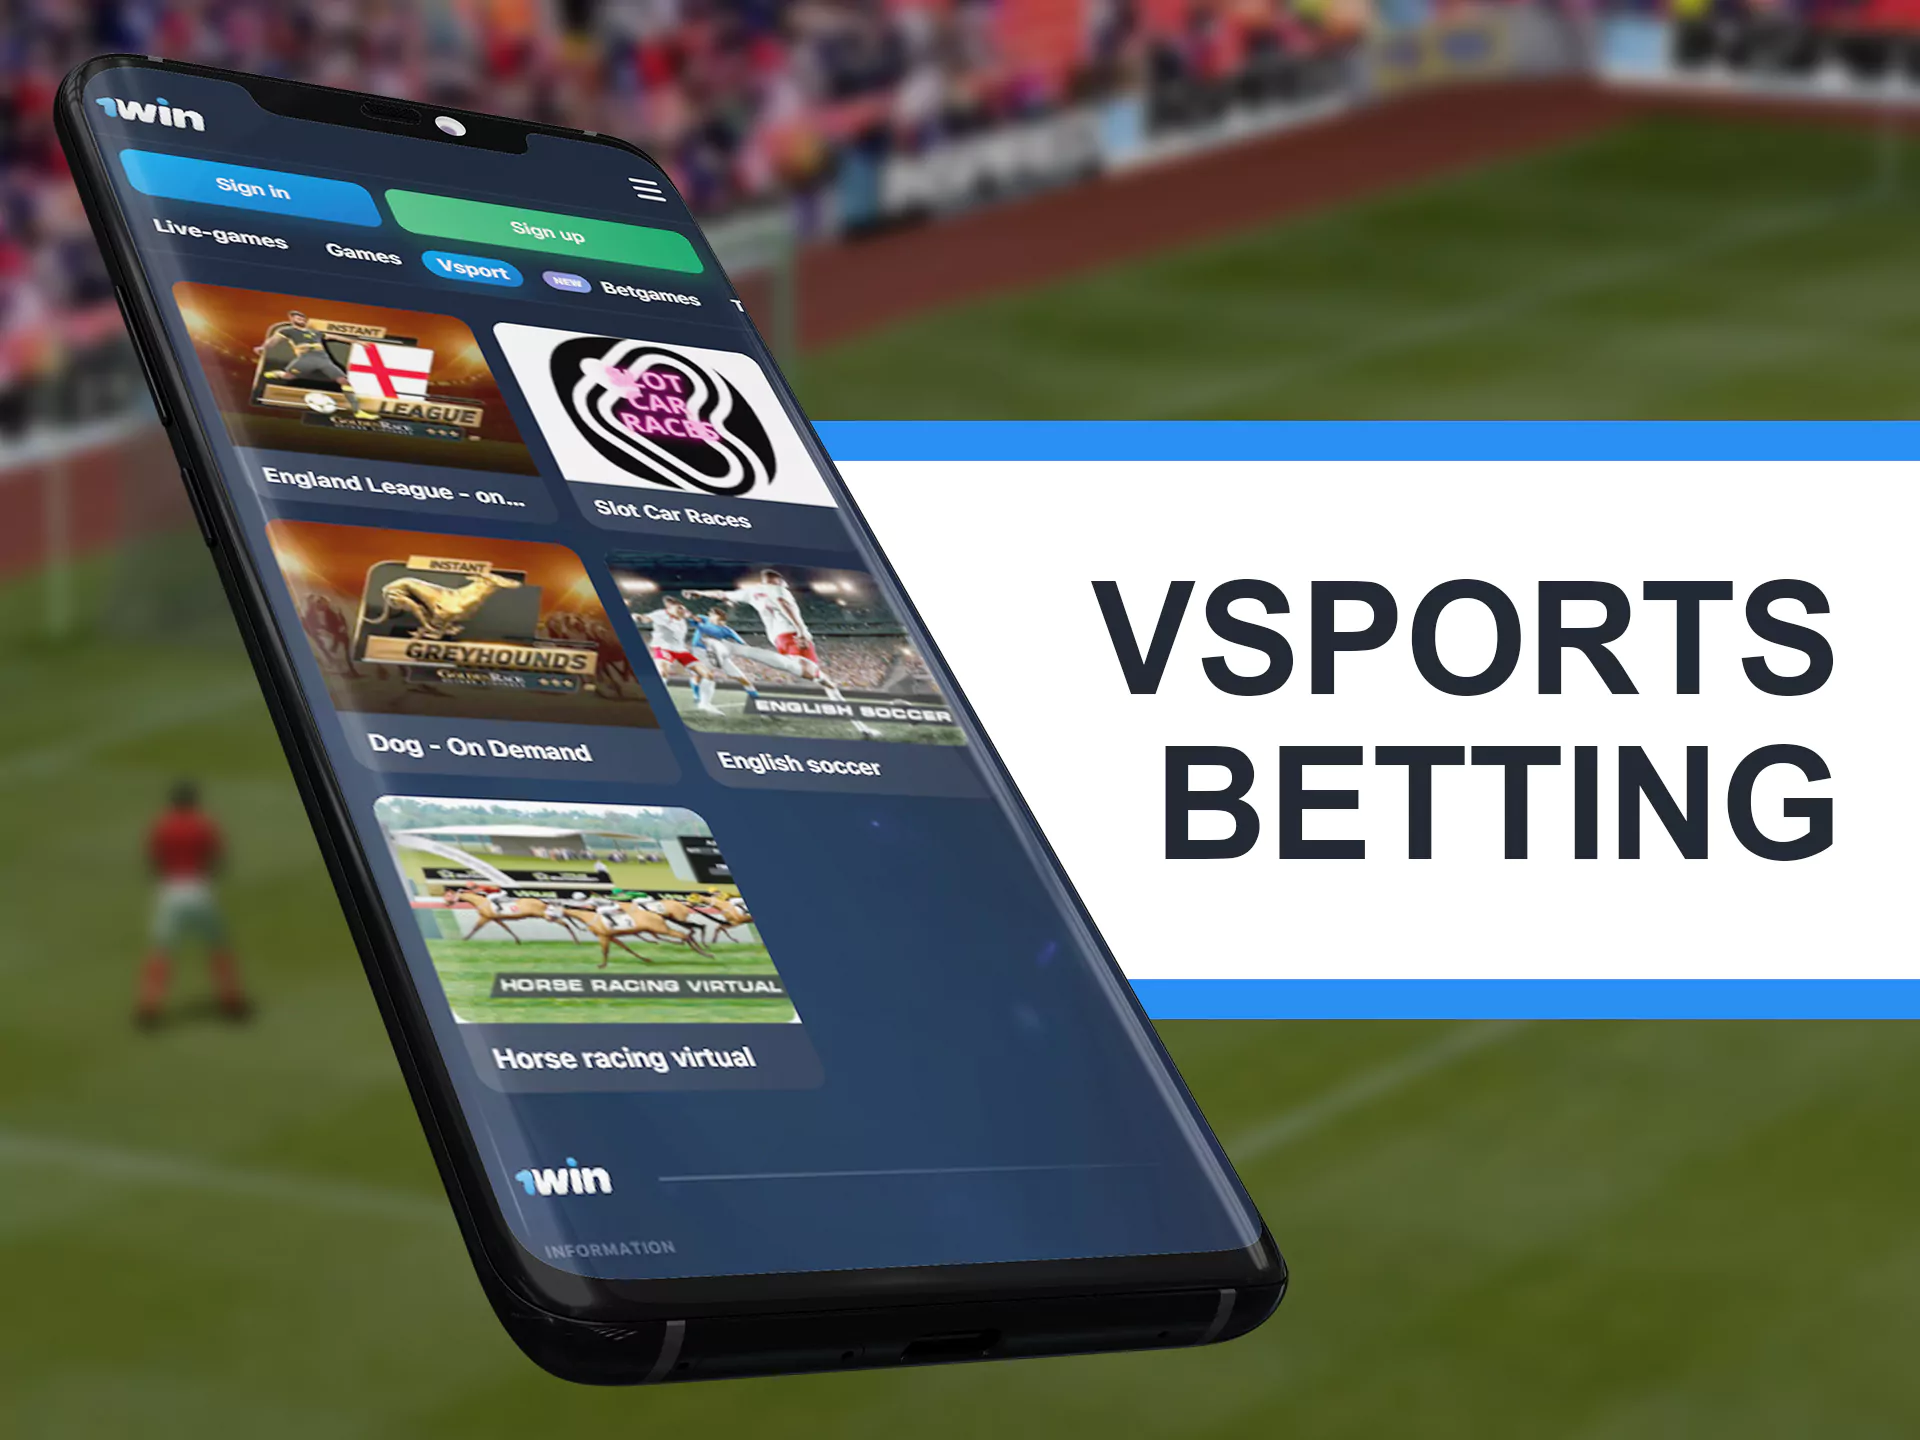 Watch and bet on vsports at 1win.